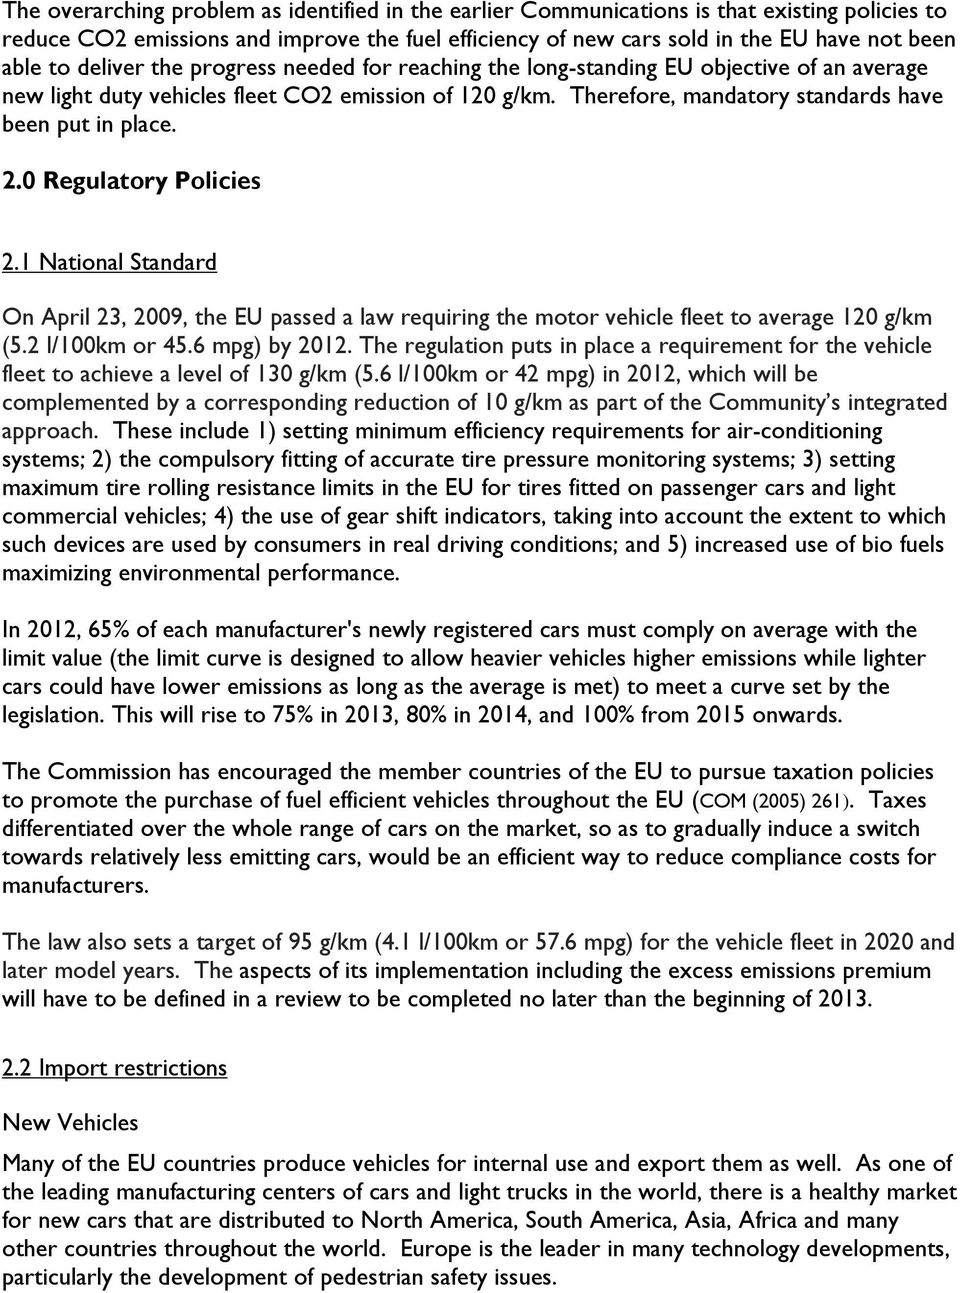 0 Regulatory Policies 2.1 National Standard On April 23, 2009, the EU passed a law requiring the motor vehicle fleet to average 120 g/km (5.2 l/100km or 45.6 mpg) by 2012.